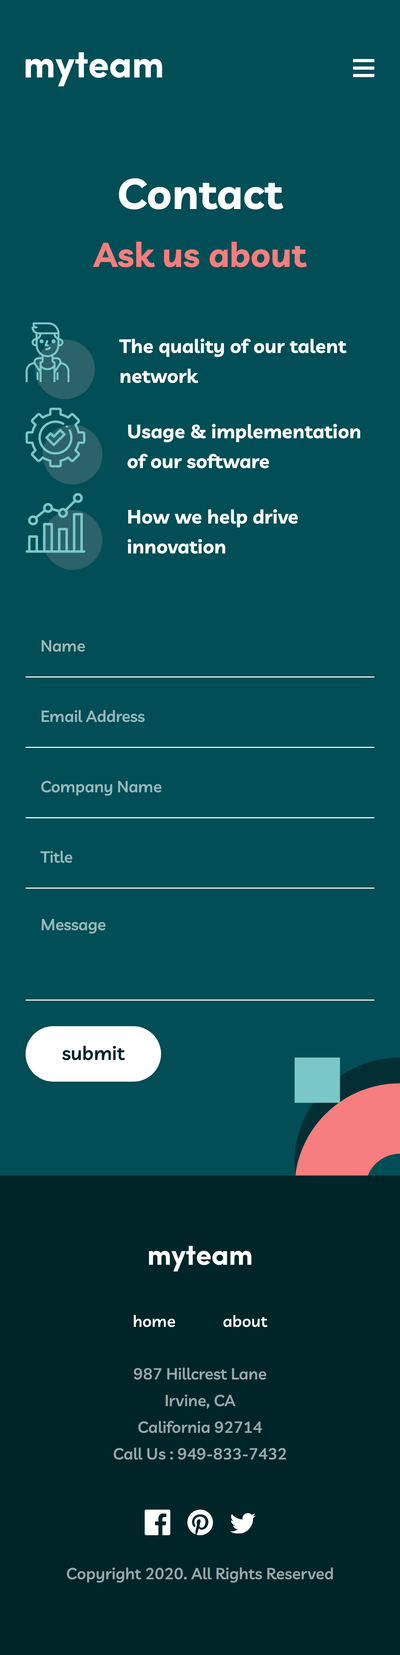 Mobile – Contact page